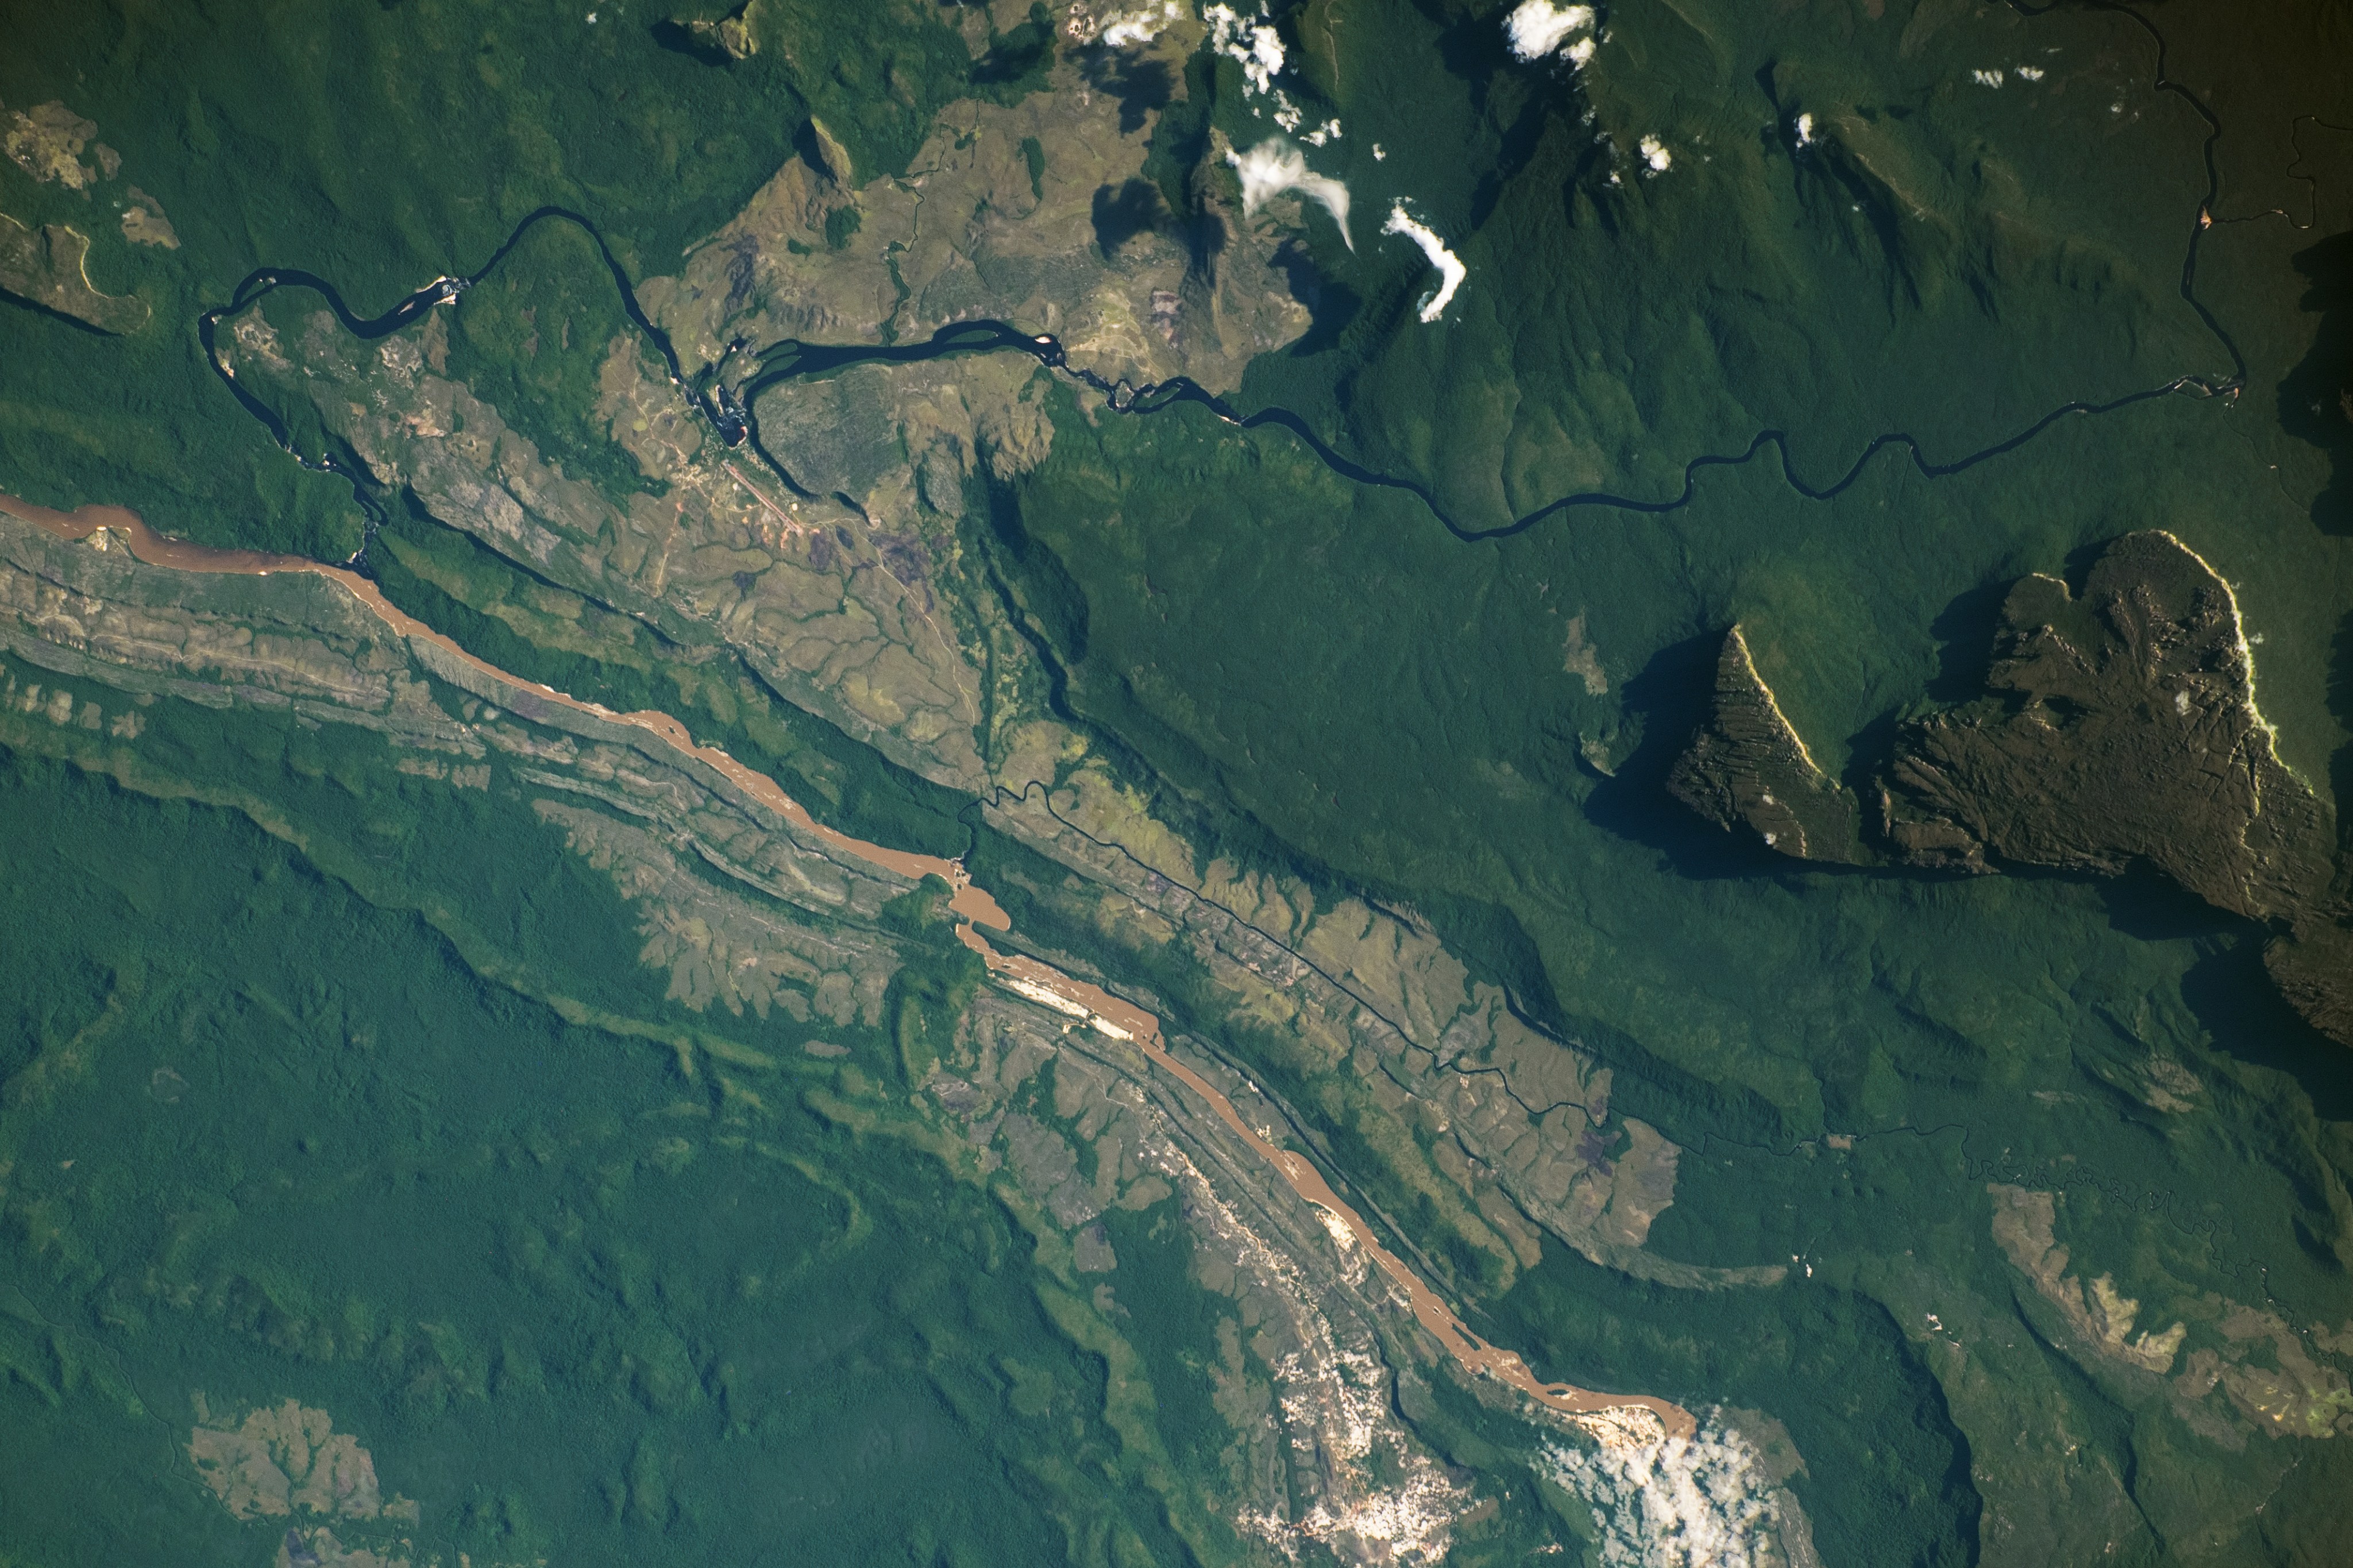 The Auyán-tepuí, also called Auyán Massif, towers thousands of feet above the surrounding area, casting shadows along its northern and western edges. The Caroní and Carrao rivers flow west of the massif, converging near Canaima and ultimately joining the Orinoco River.